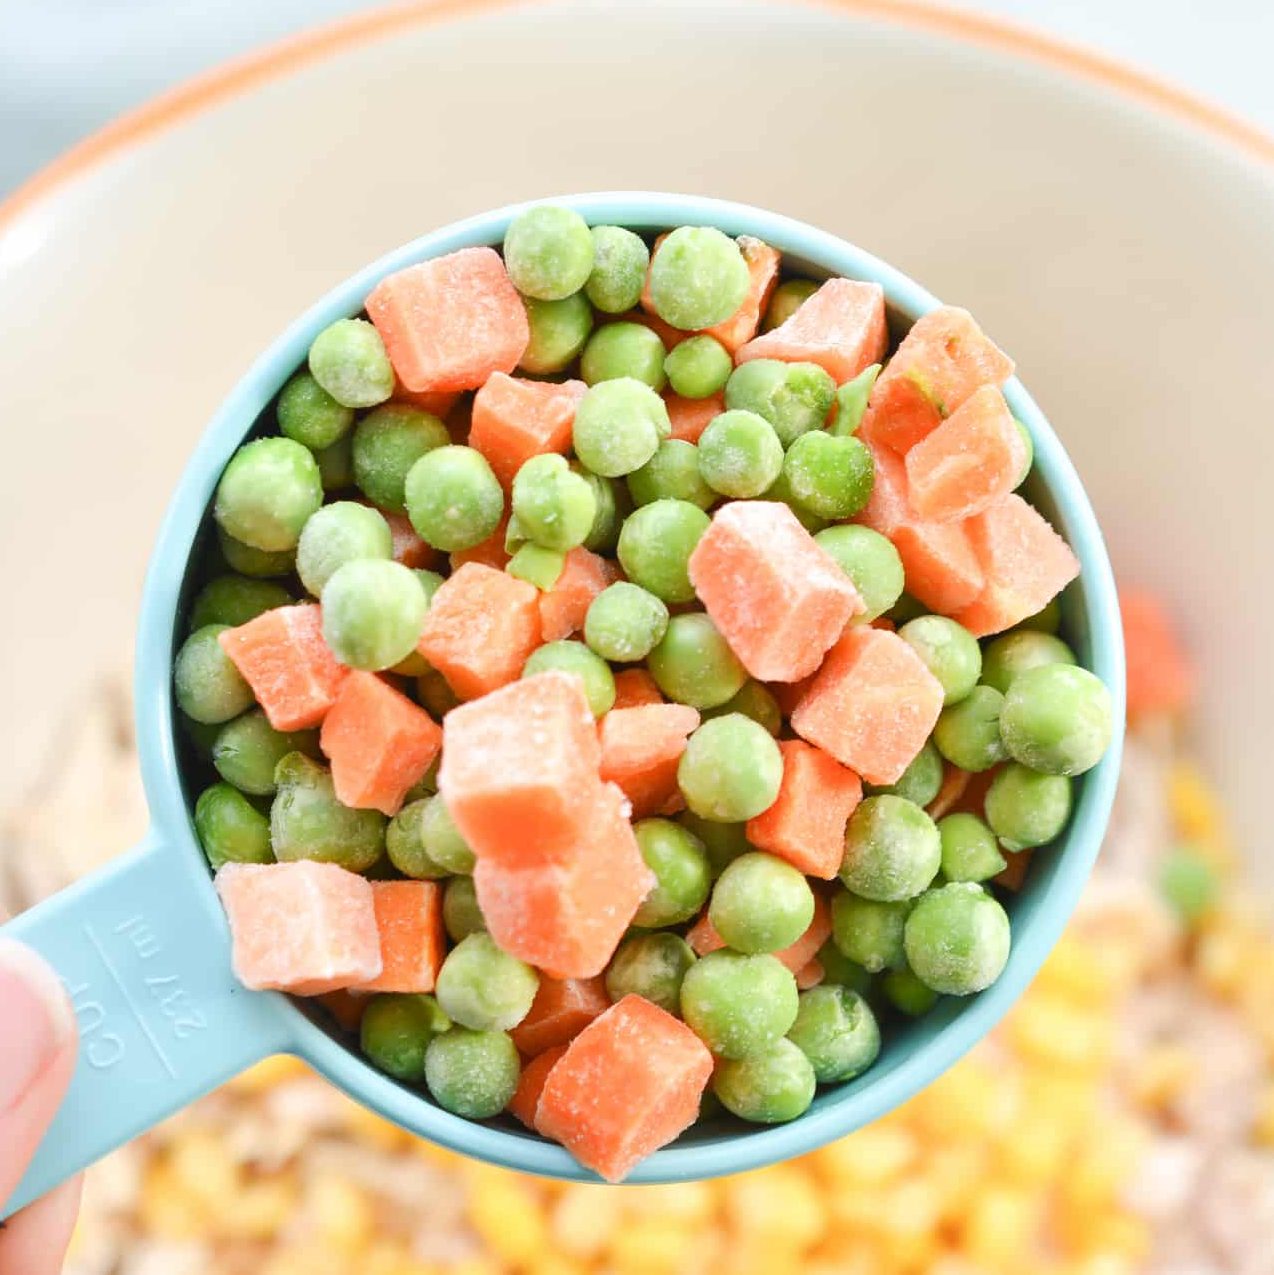 add 1 cup of frozen peas and carrots.